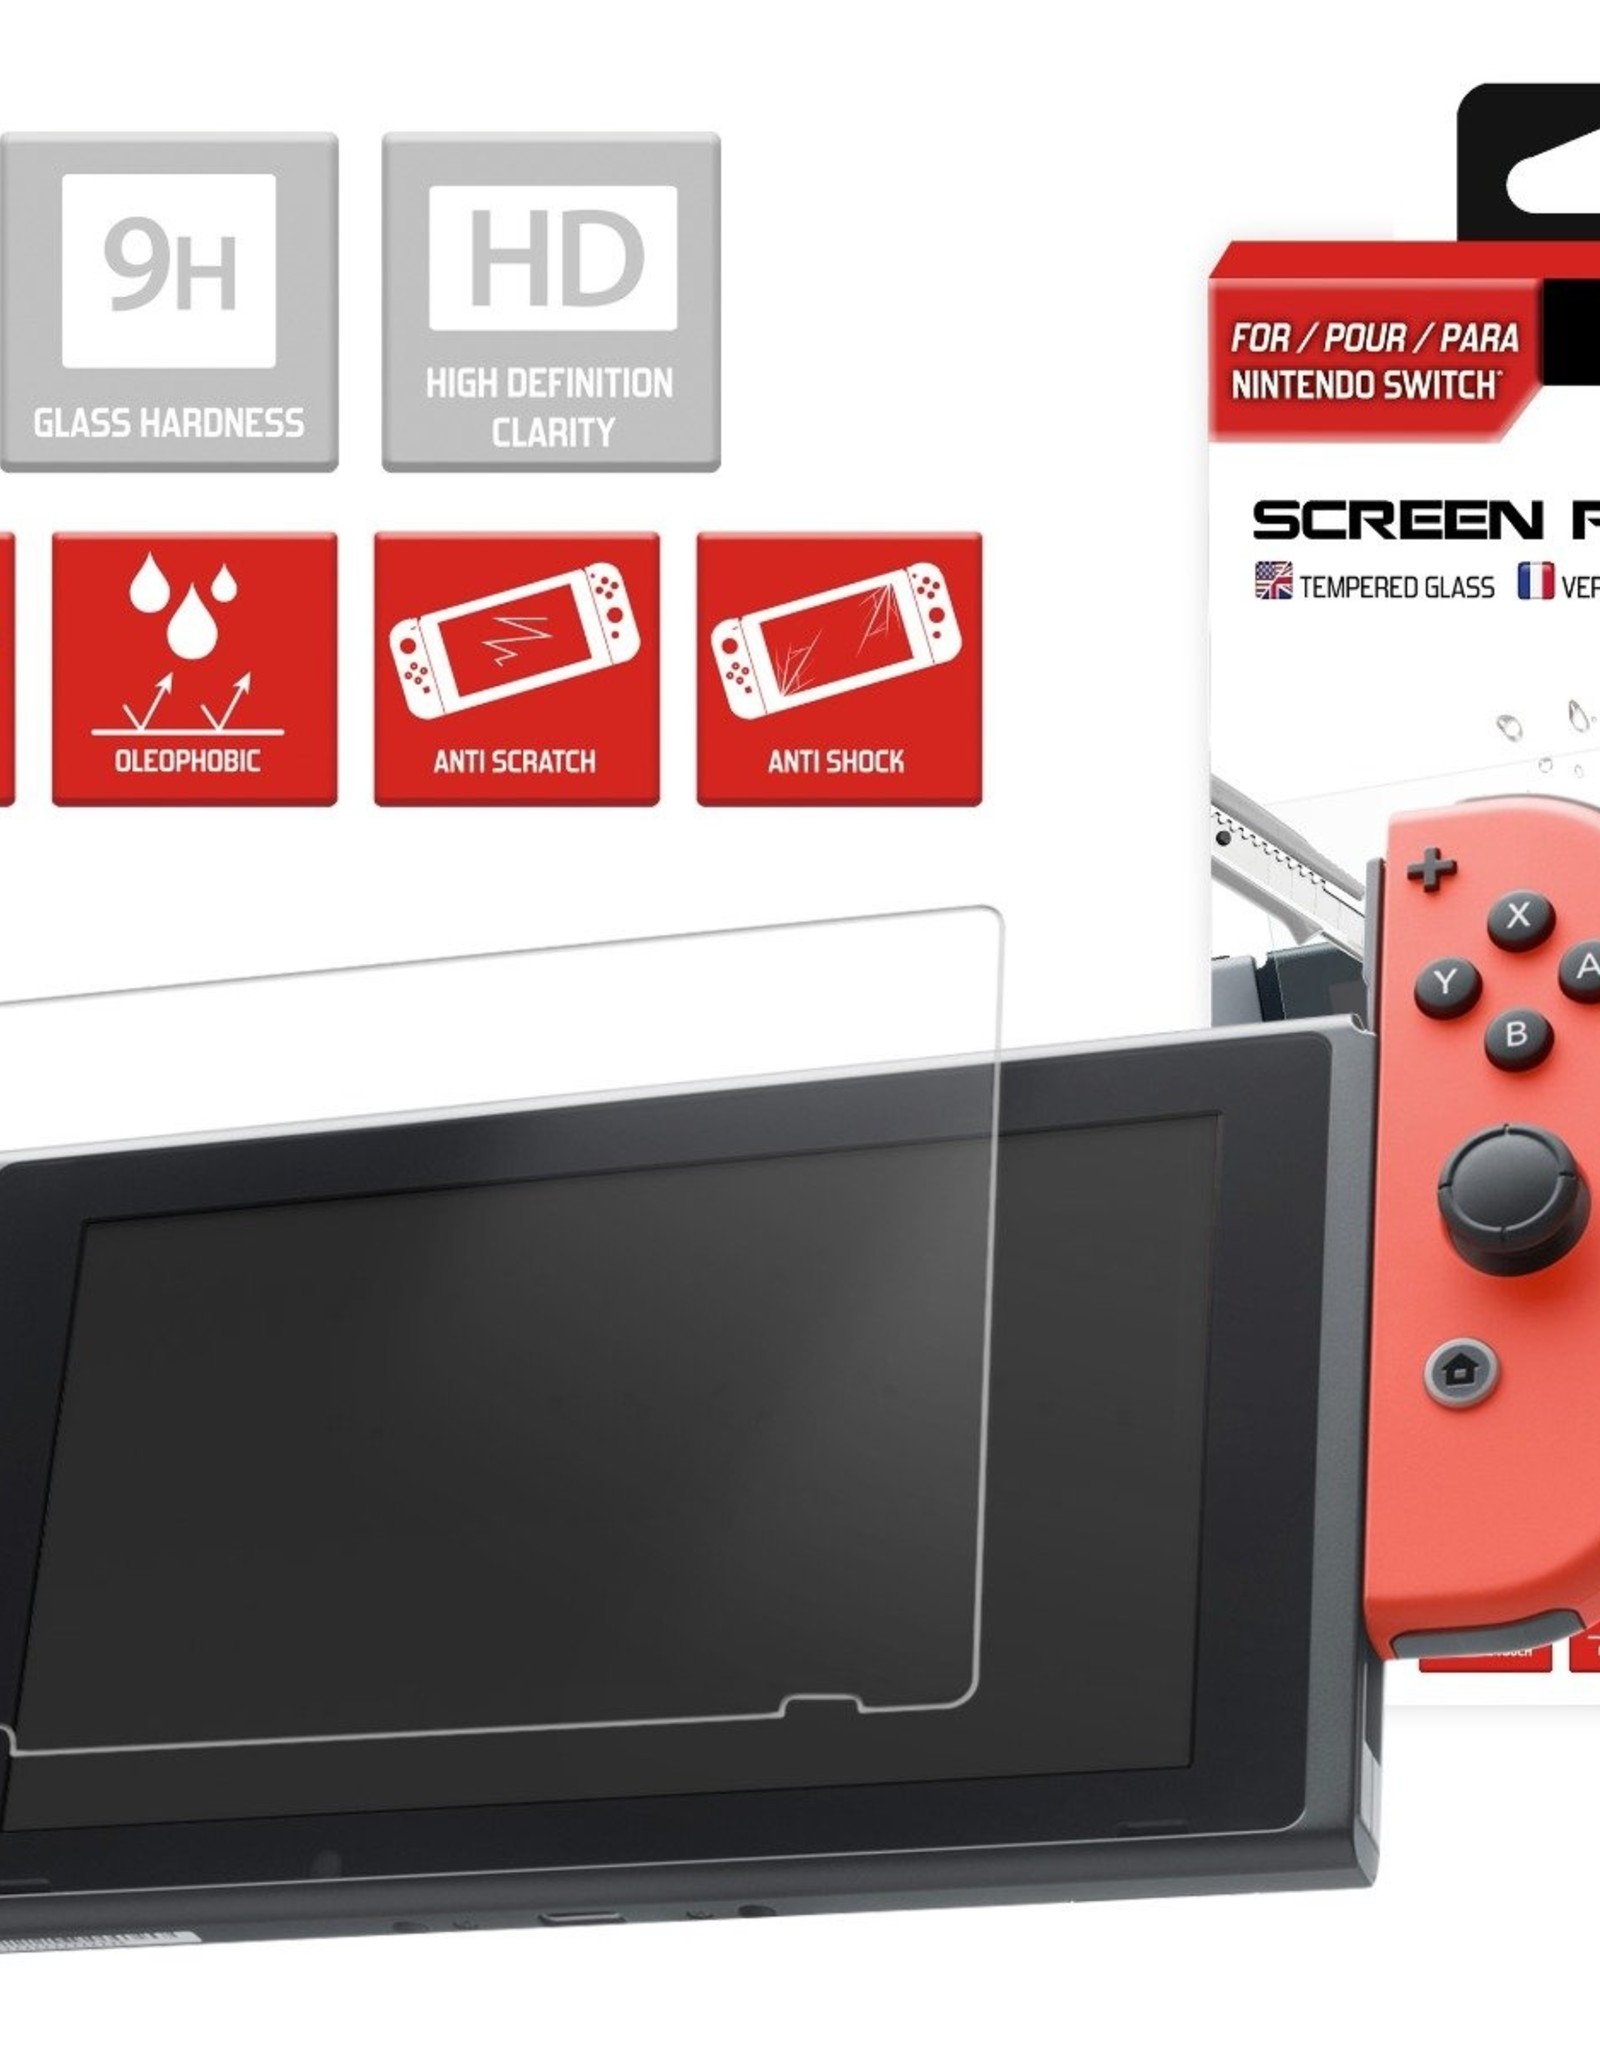 Subsonic Subsonic Nintendo switch screen protector